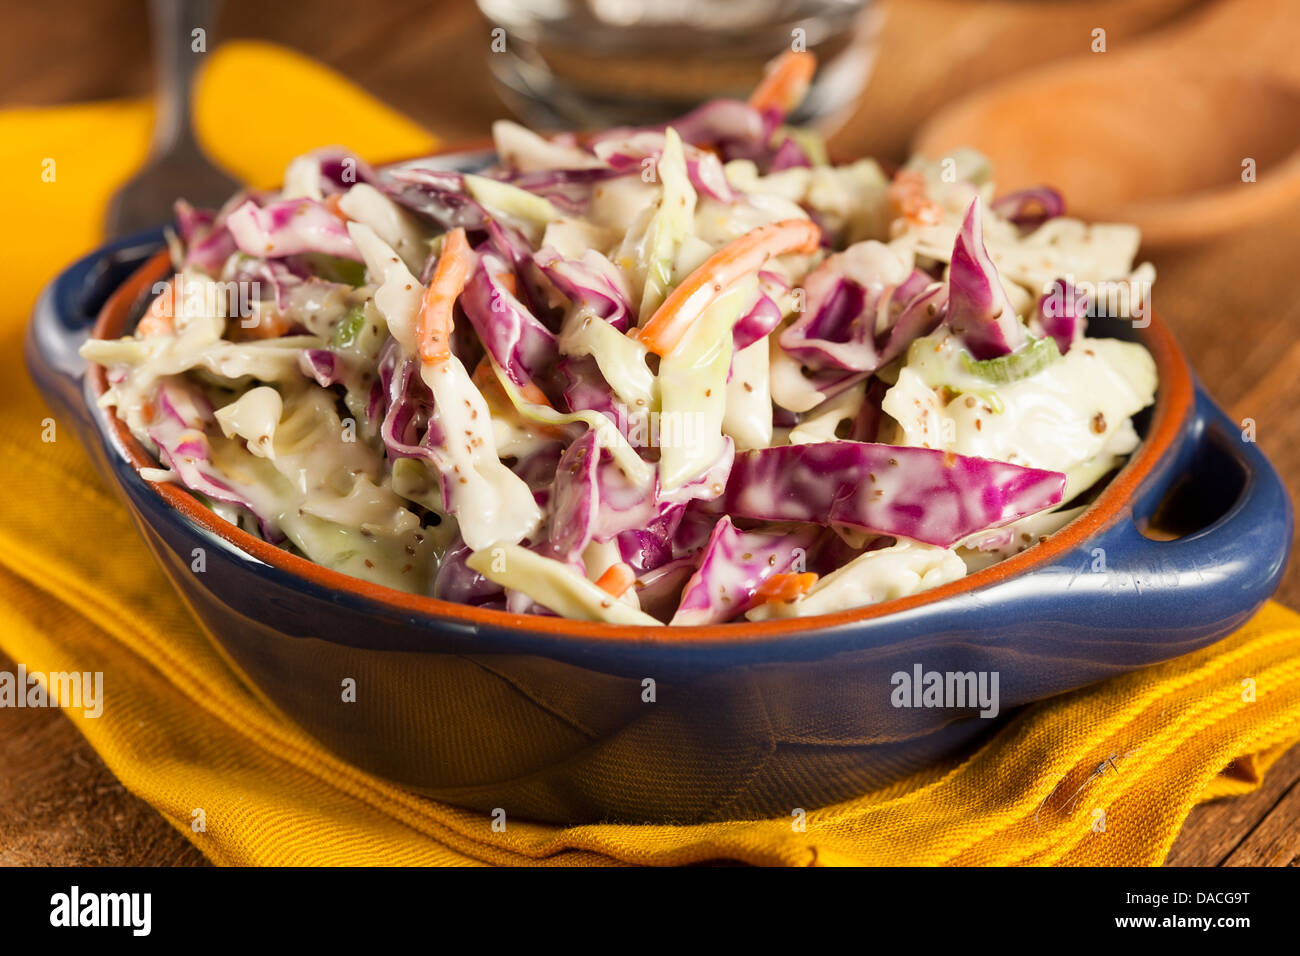 Homemade Coleslaw with Shredded Cabbage, Carrot, and Lettuce Stock Photo